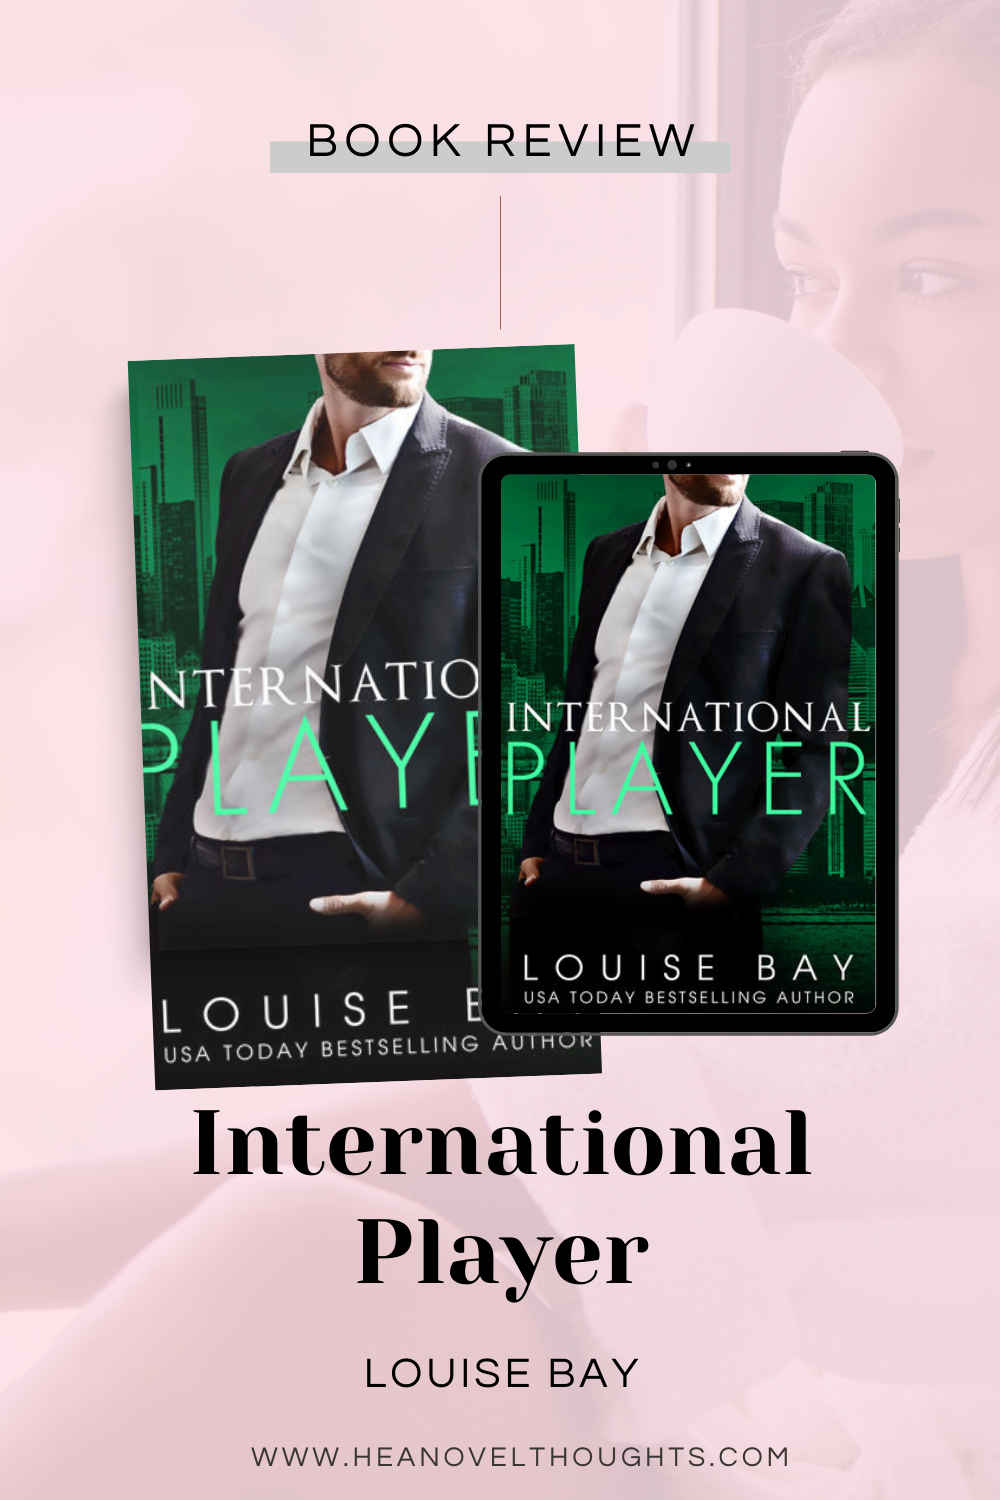 International Player by Louise Bay